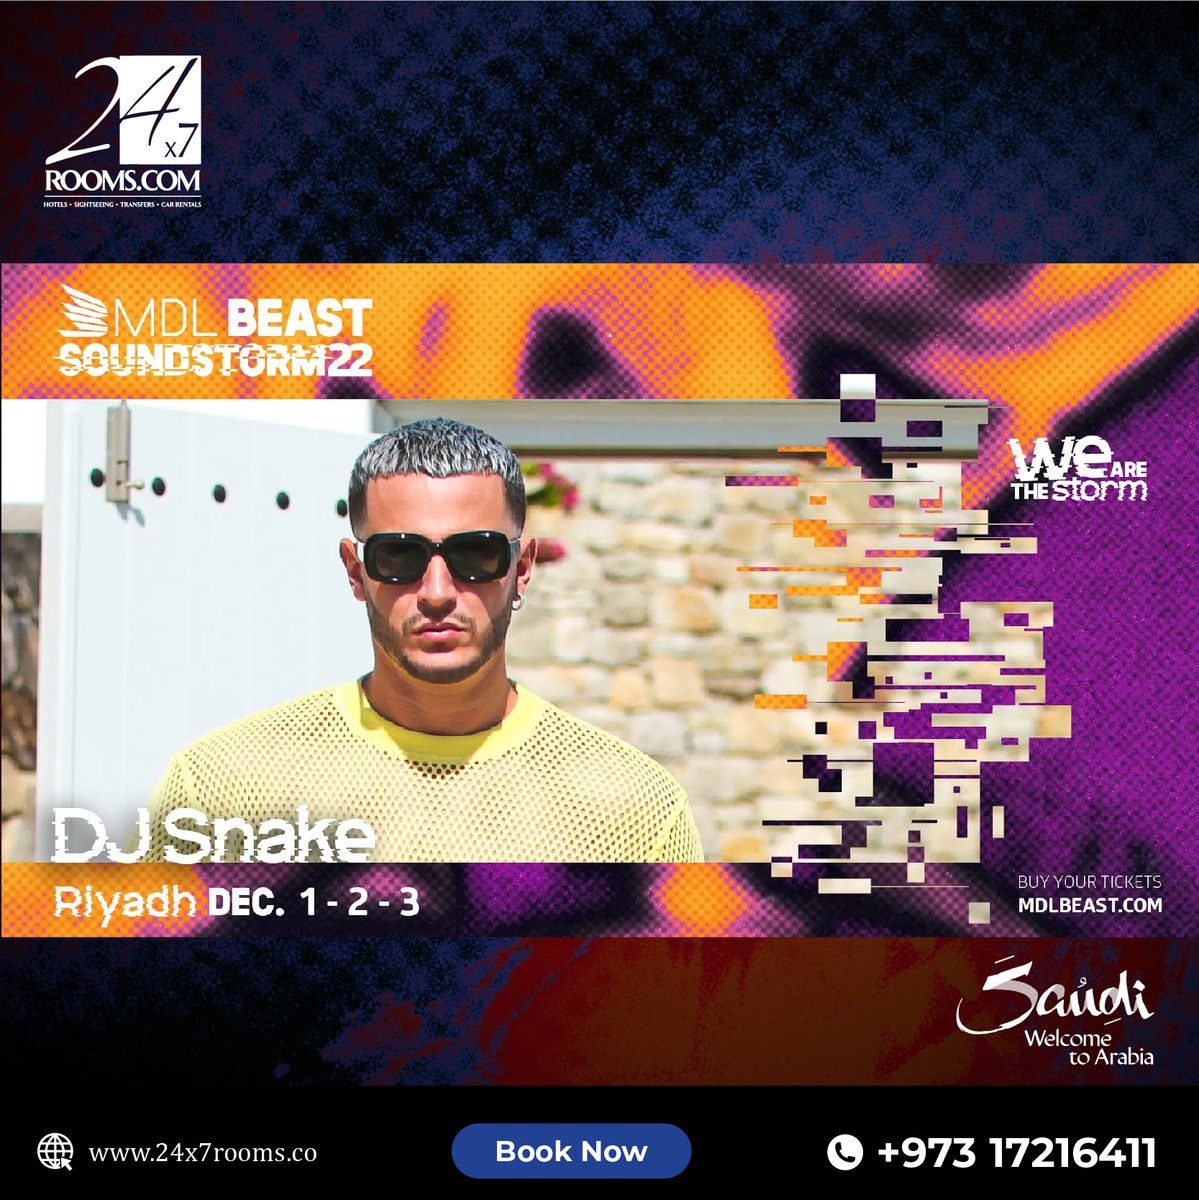 DJ Snake will perform LIVE at the biggest music festival of 2022. MDL BEAST SOUNDSTORM 22 is back in Saudi and you need to book your tickets right now!
#djsnake #mdlbeast #concert #saudiarabia🇸🇦 #dj_william_snake #mdlbeast2022 🌪️ #visitsaudi #riyadh #soundstorm2022 #mdlbeast2022